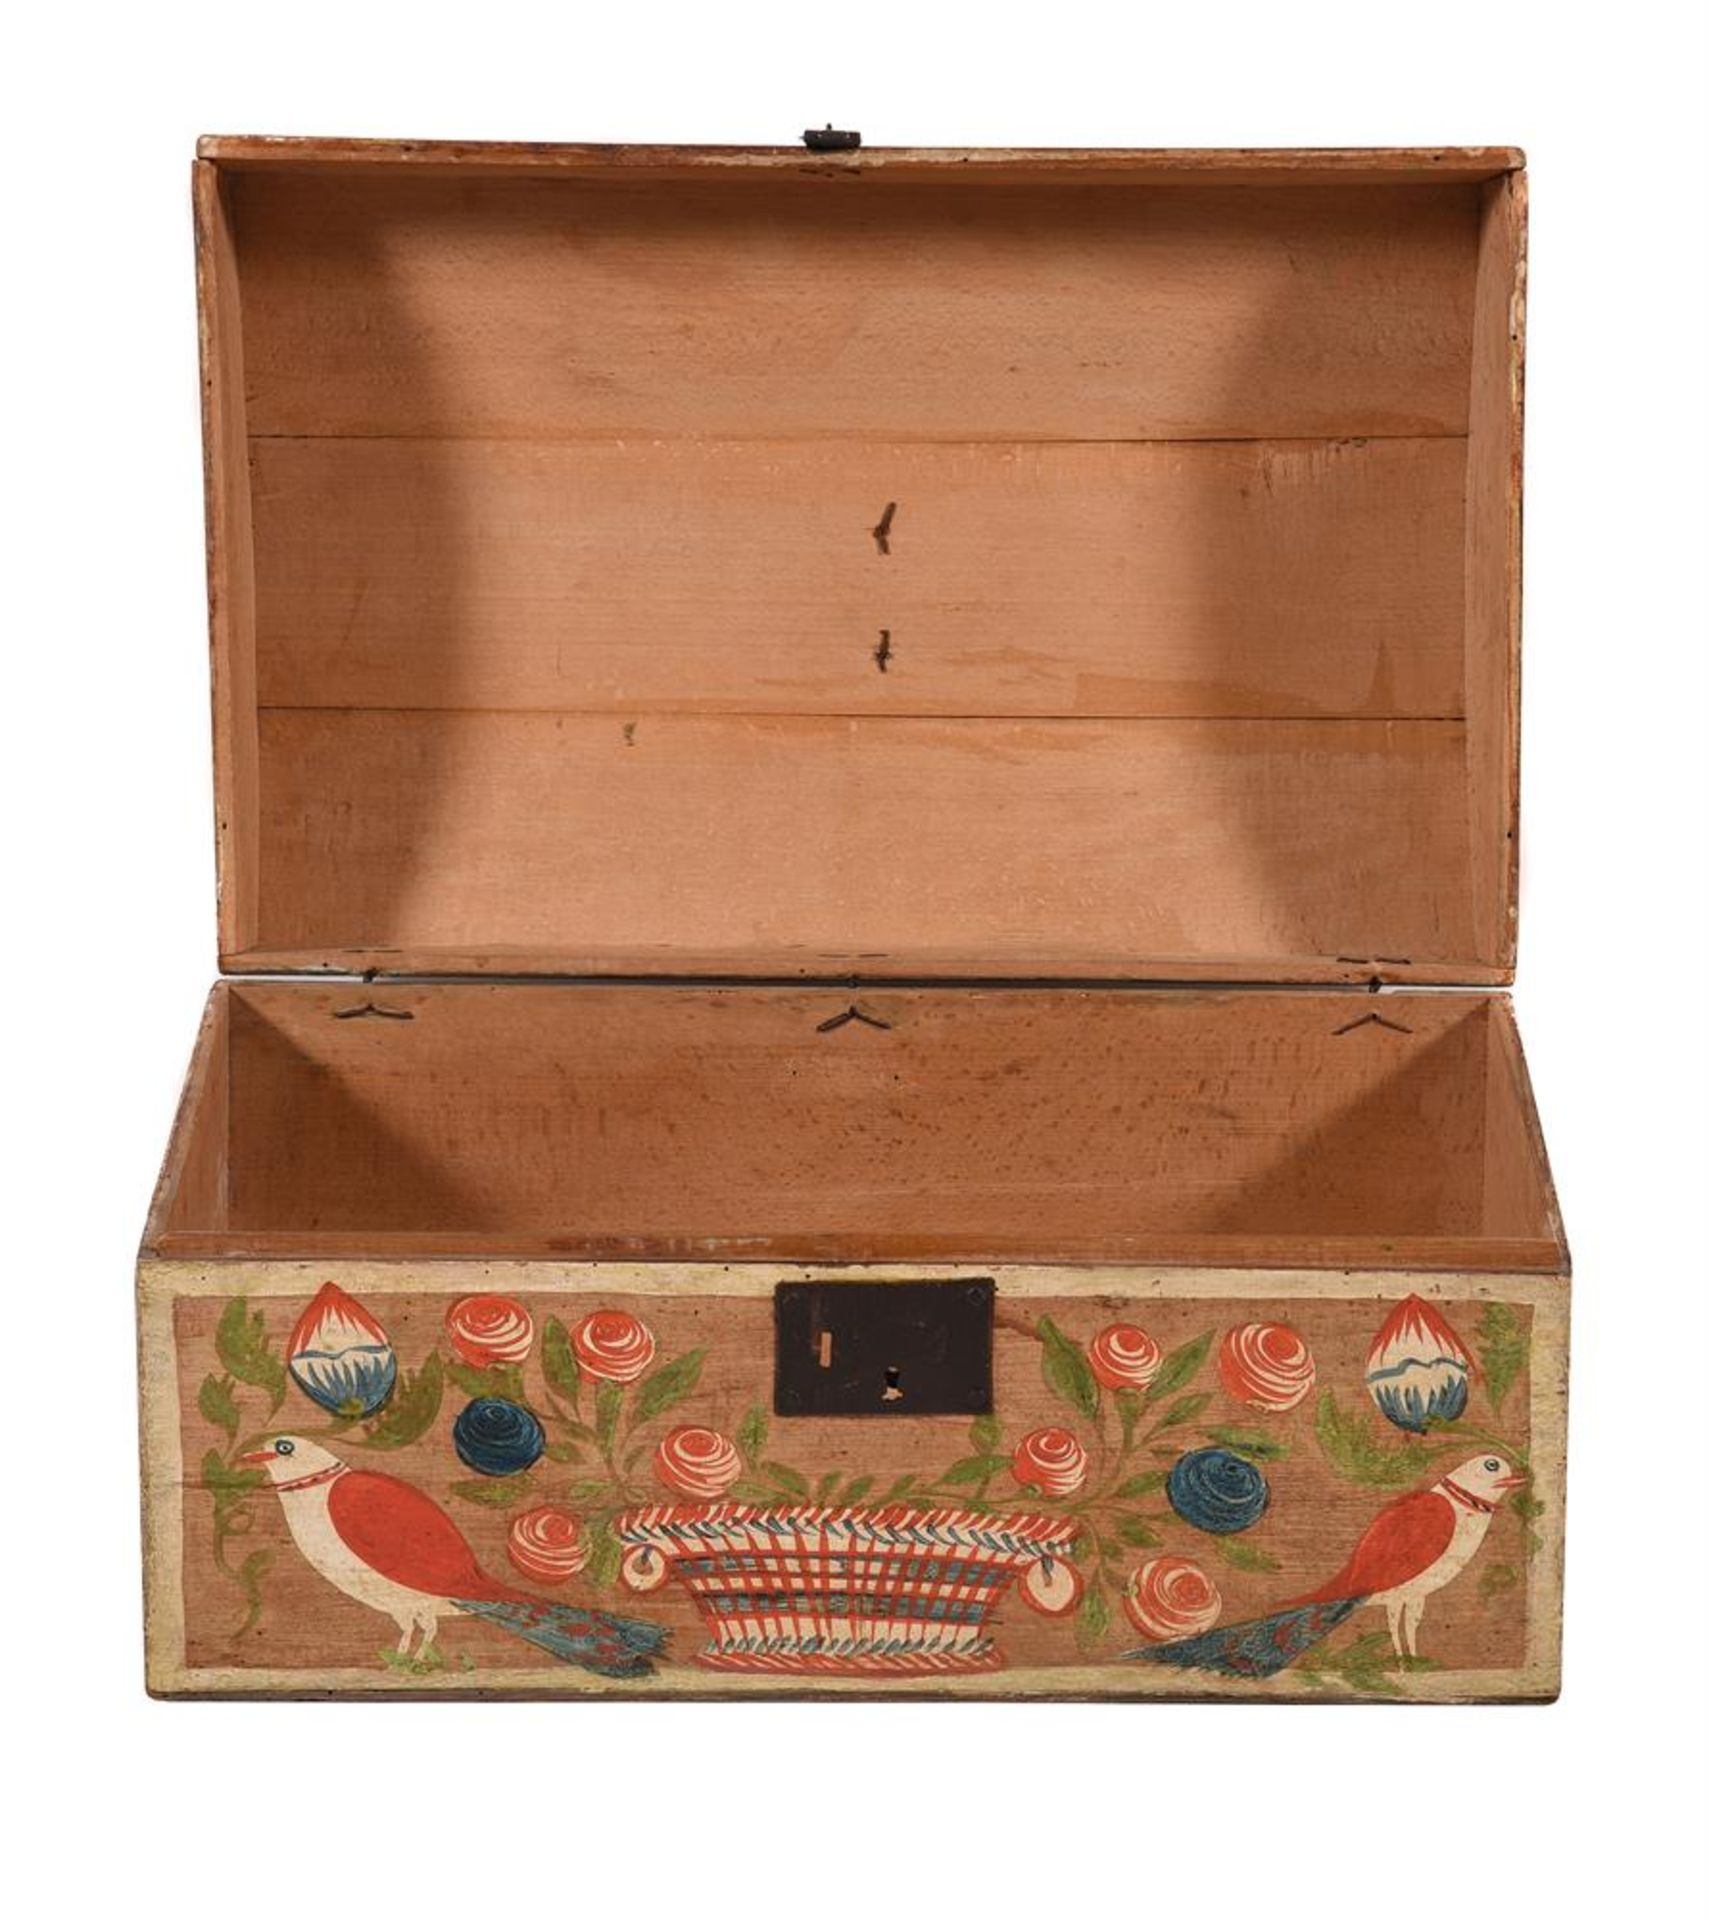 A FRENCH POLYCHROME PAINTED POPLAR MARRIAGE CHEST, LATE 18TH OR EARLY 19TH CENTURY - Image 4 of 4